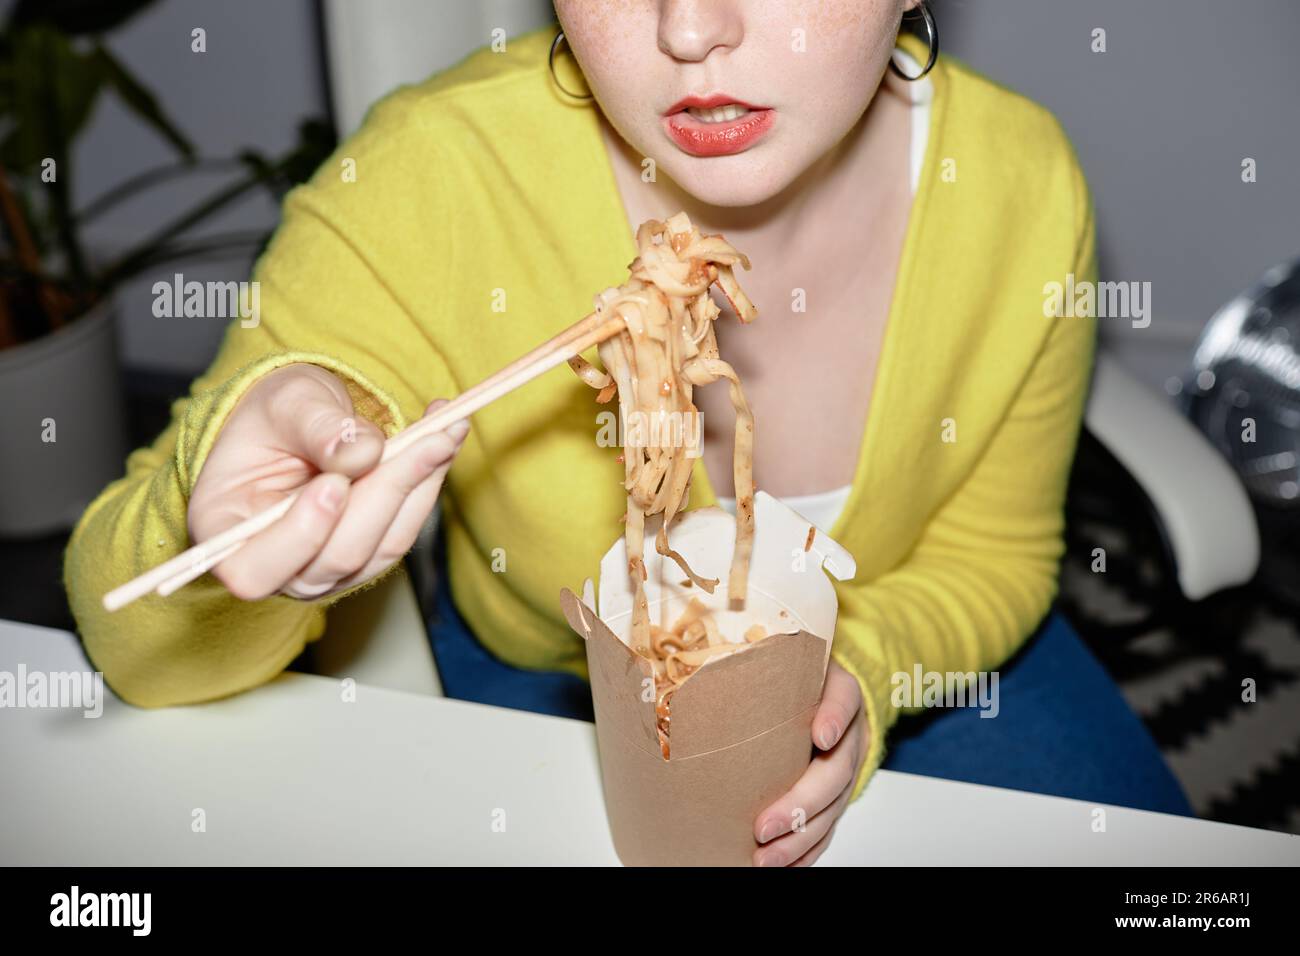 Closeup of young woman eating takeout noodles indoors, shot with flash Stock Photo